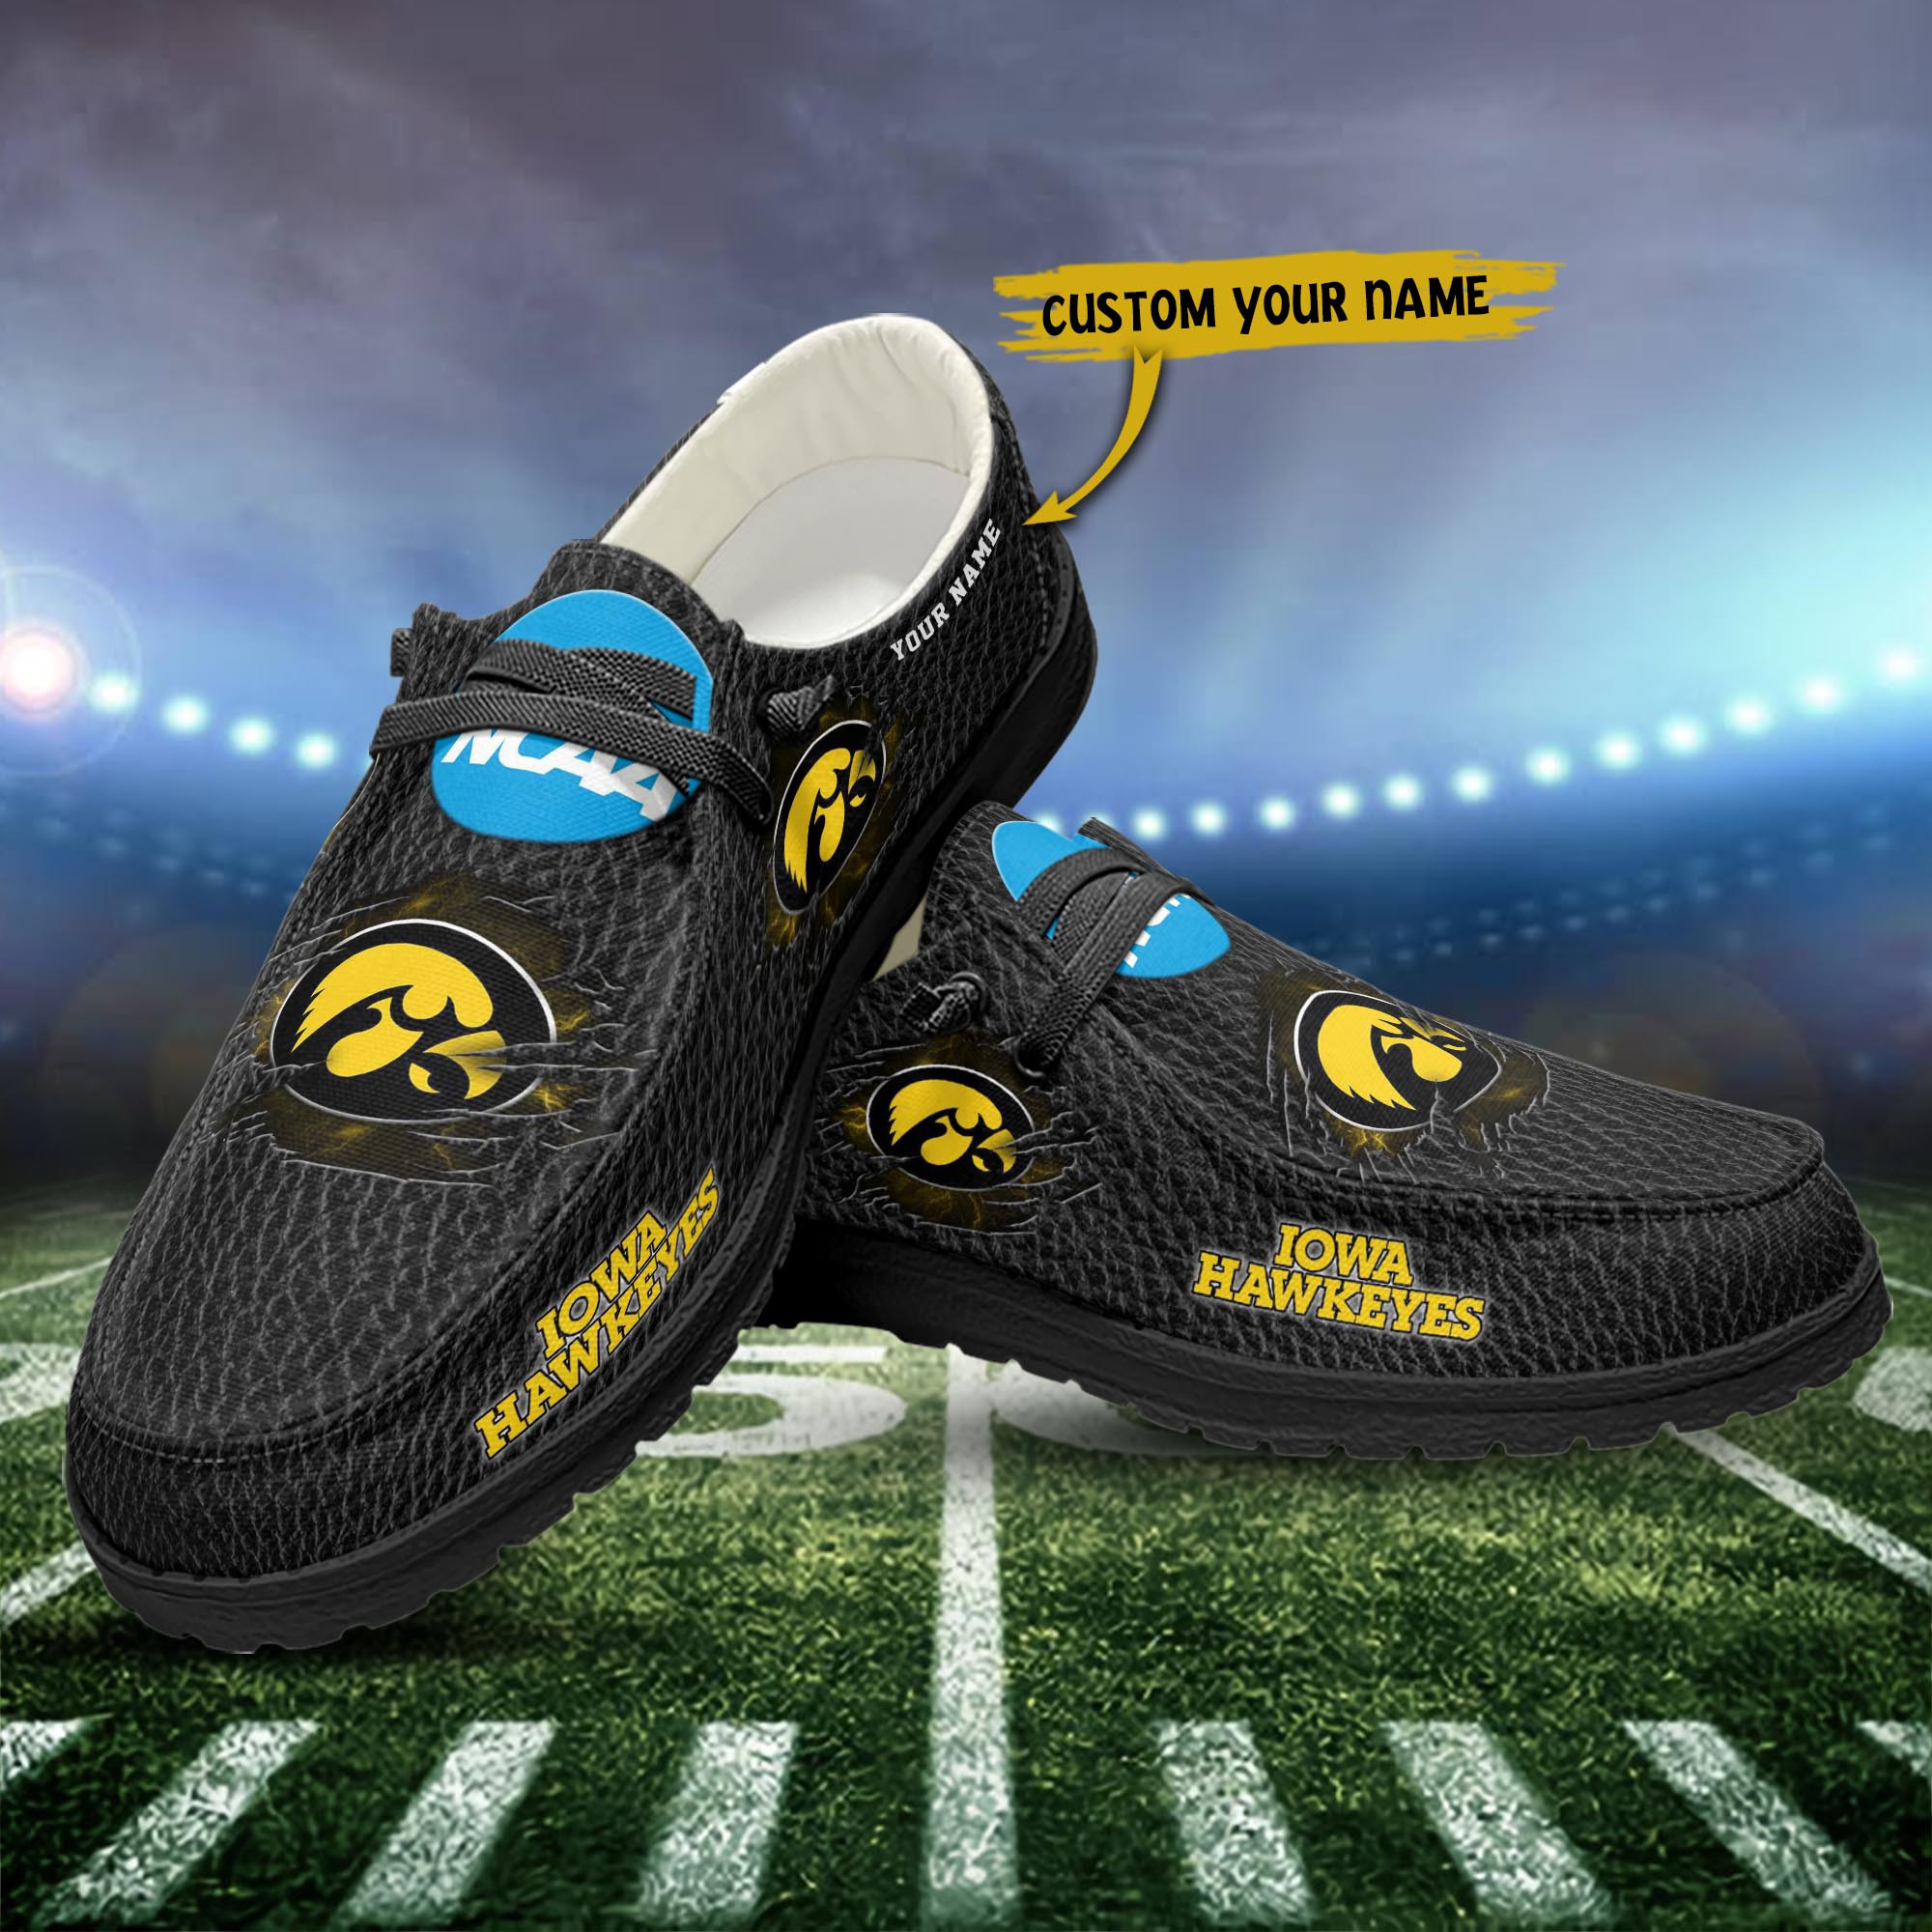 Iowa Hawkeyes Hey Dude Shoes Loafer Shoes Custom Your Name - DESIGN-TREND